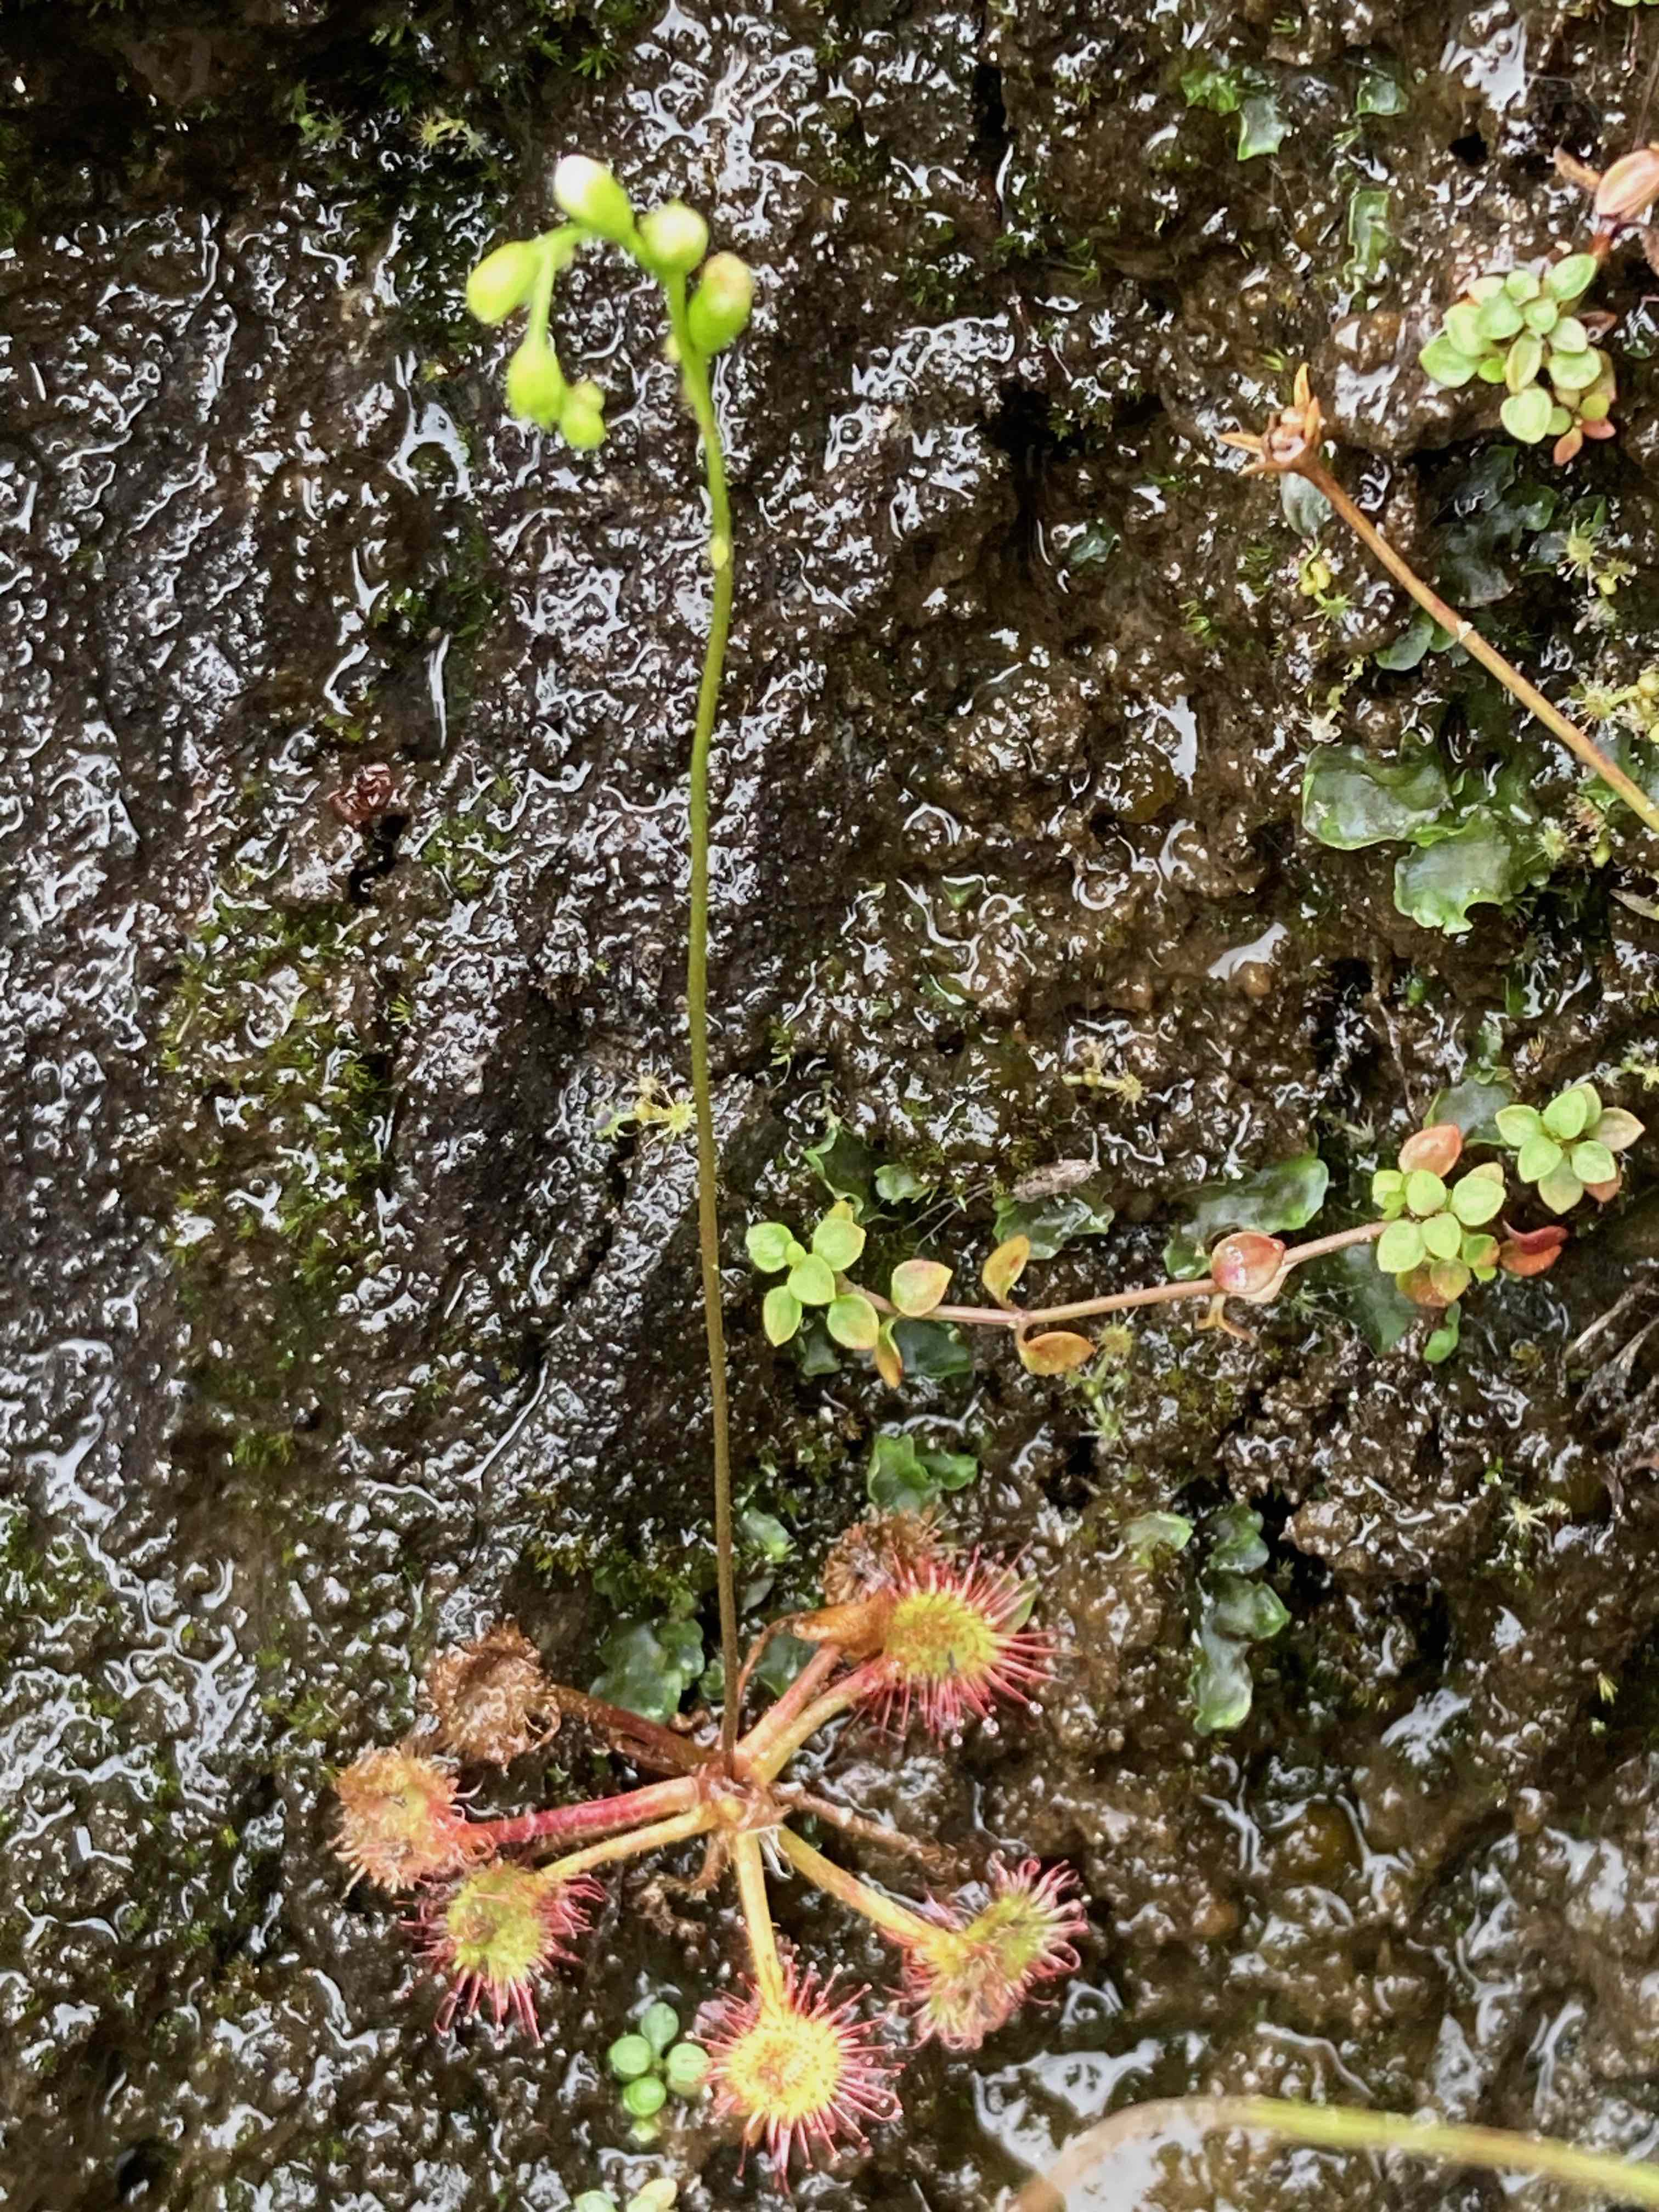 The Scientific Name is Drosera rotundifolia. You will likely hear them called Roundleaf Sundew. This picture shows the The flowering stems grow about 5 inches above the leaves.  The white flowers are arranged in a spike. of Drosera rotundifolia